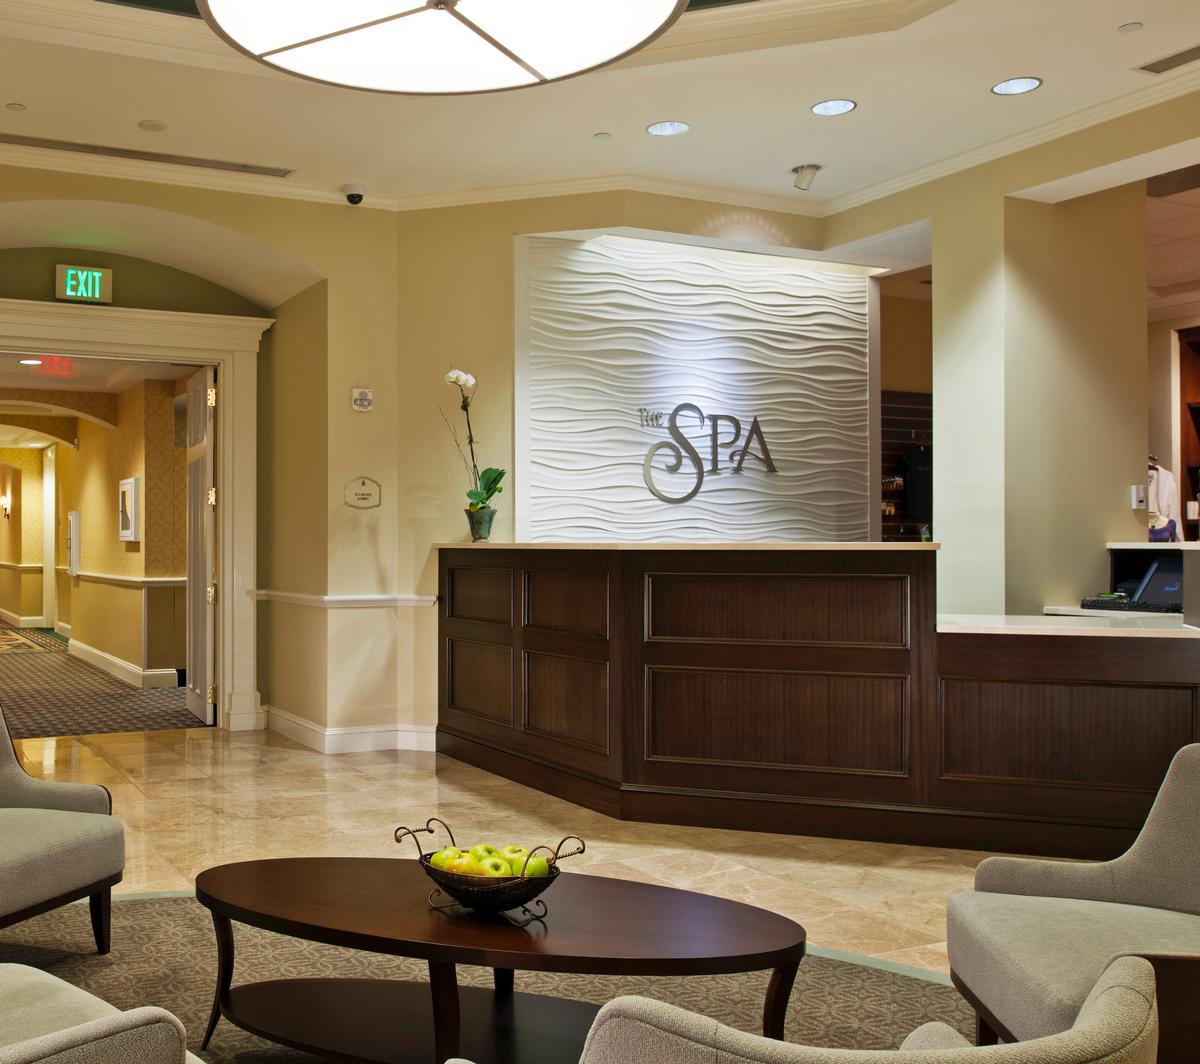 Graper Cosmetic Surgery has opened a location within The Spa at Ballantyne Hotel / Bissell